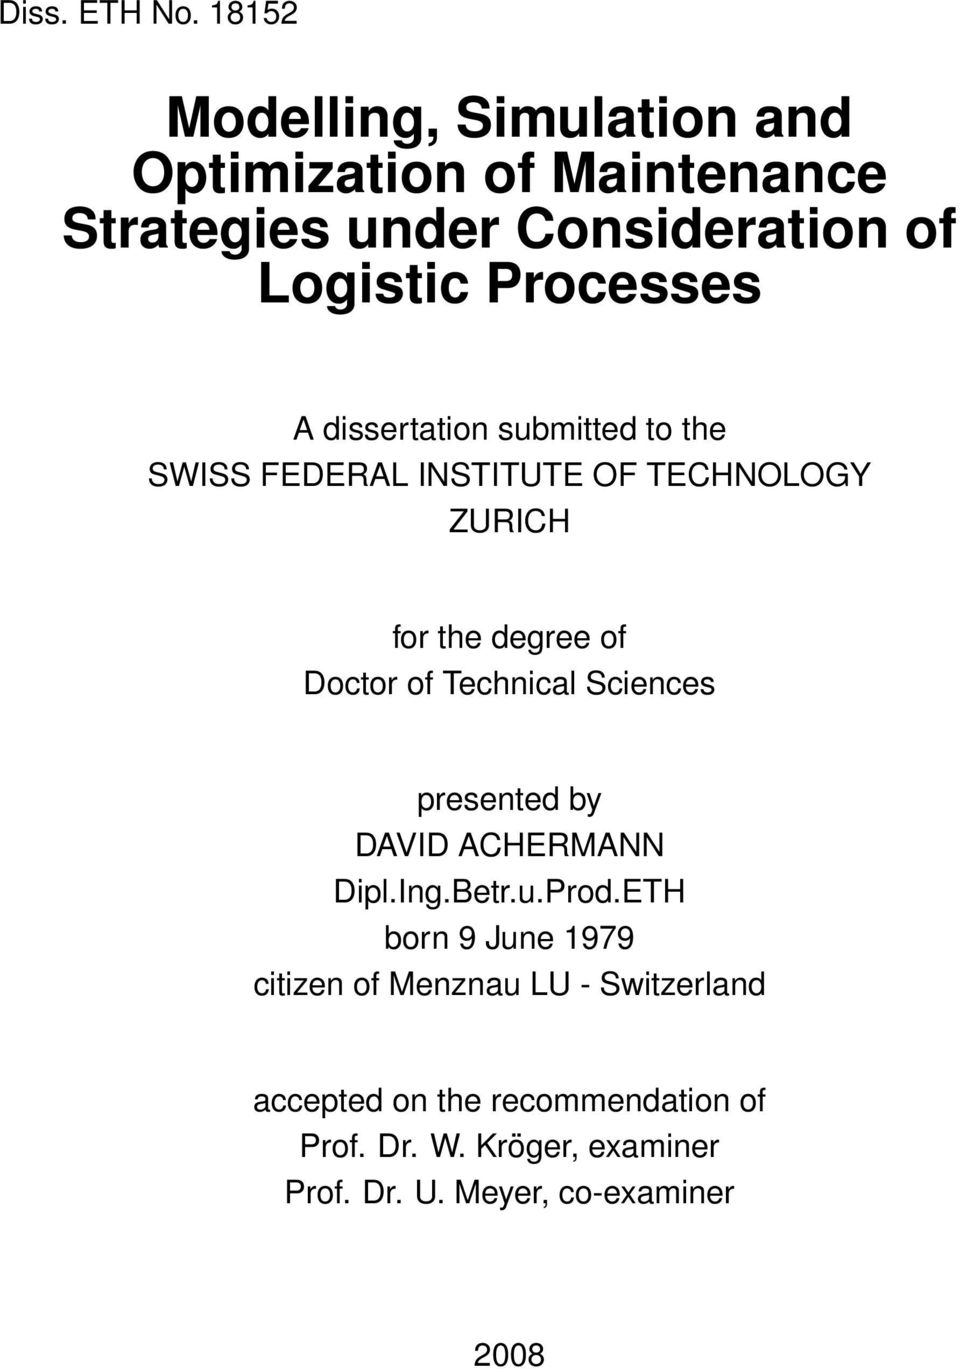 dissertation submitted to the SWISS FEDERAL INSTITUTE OF TECHNOLOGY ZURICH for the degree of Doctor of Technical